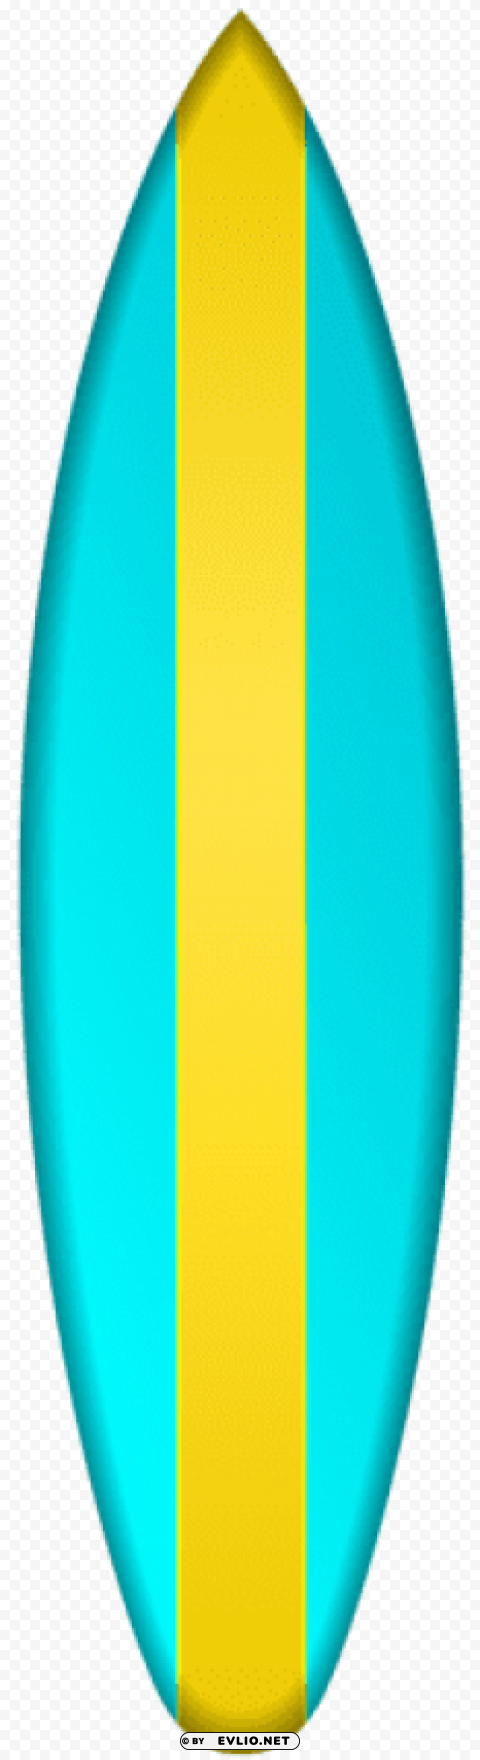 surfboard PNG Image Isolated with Clear Transparency